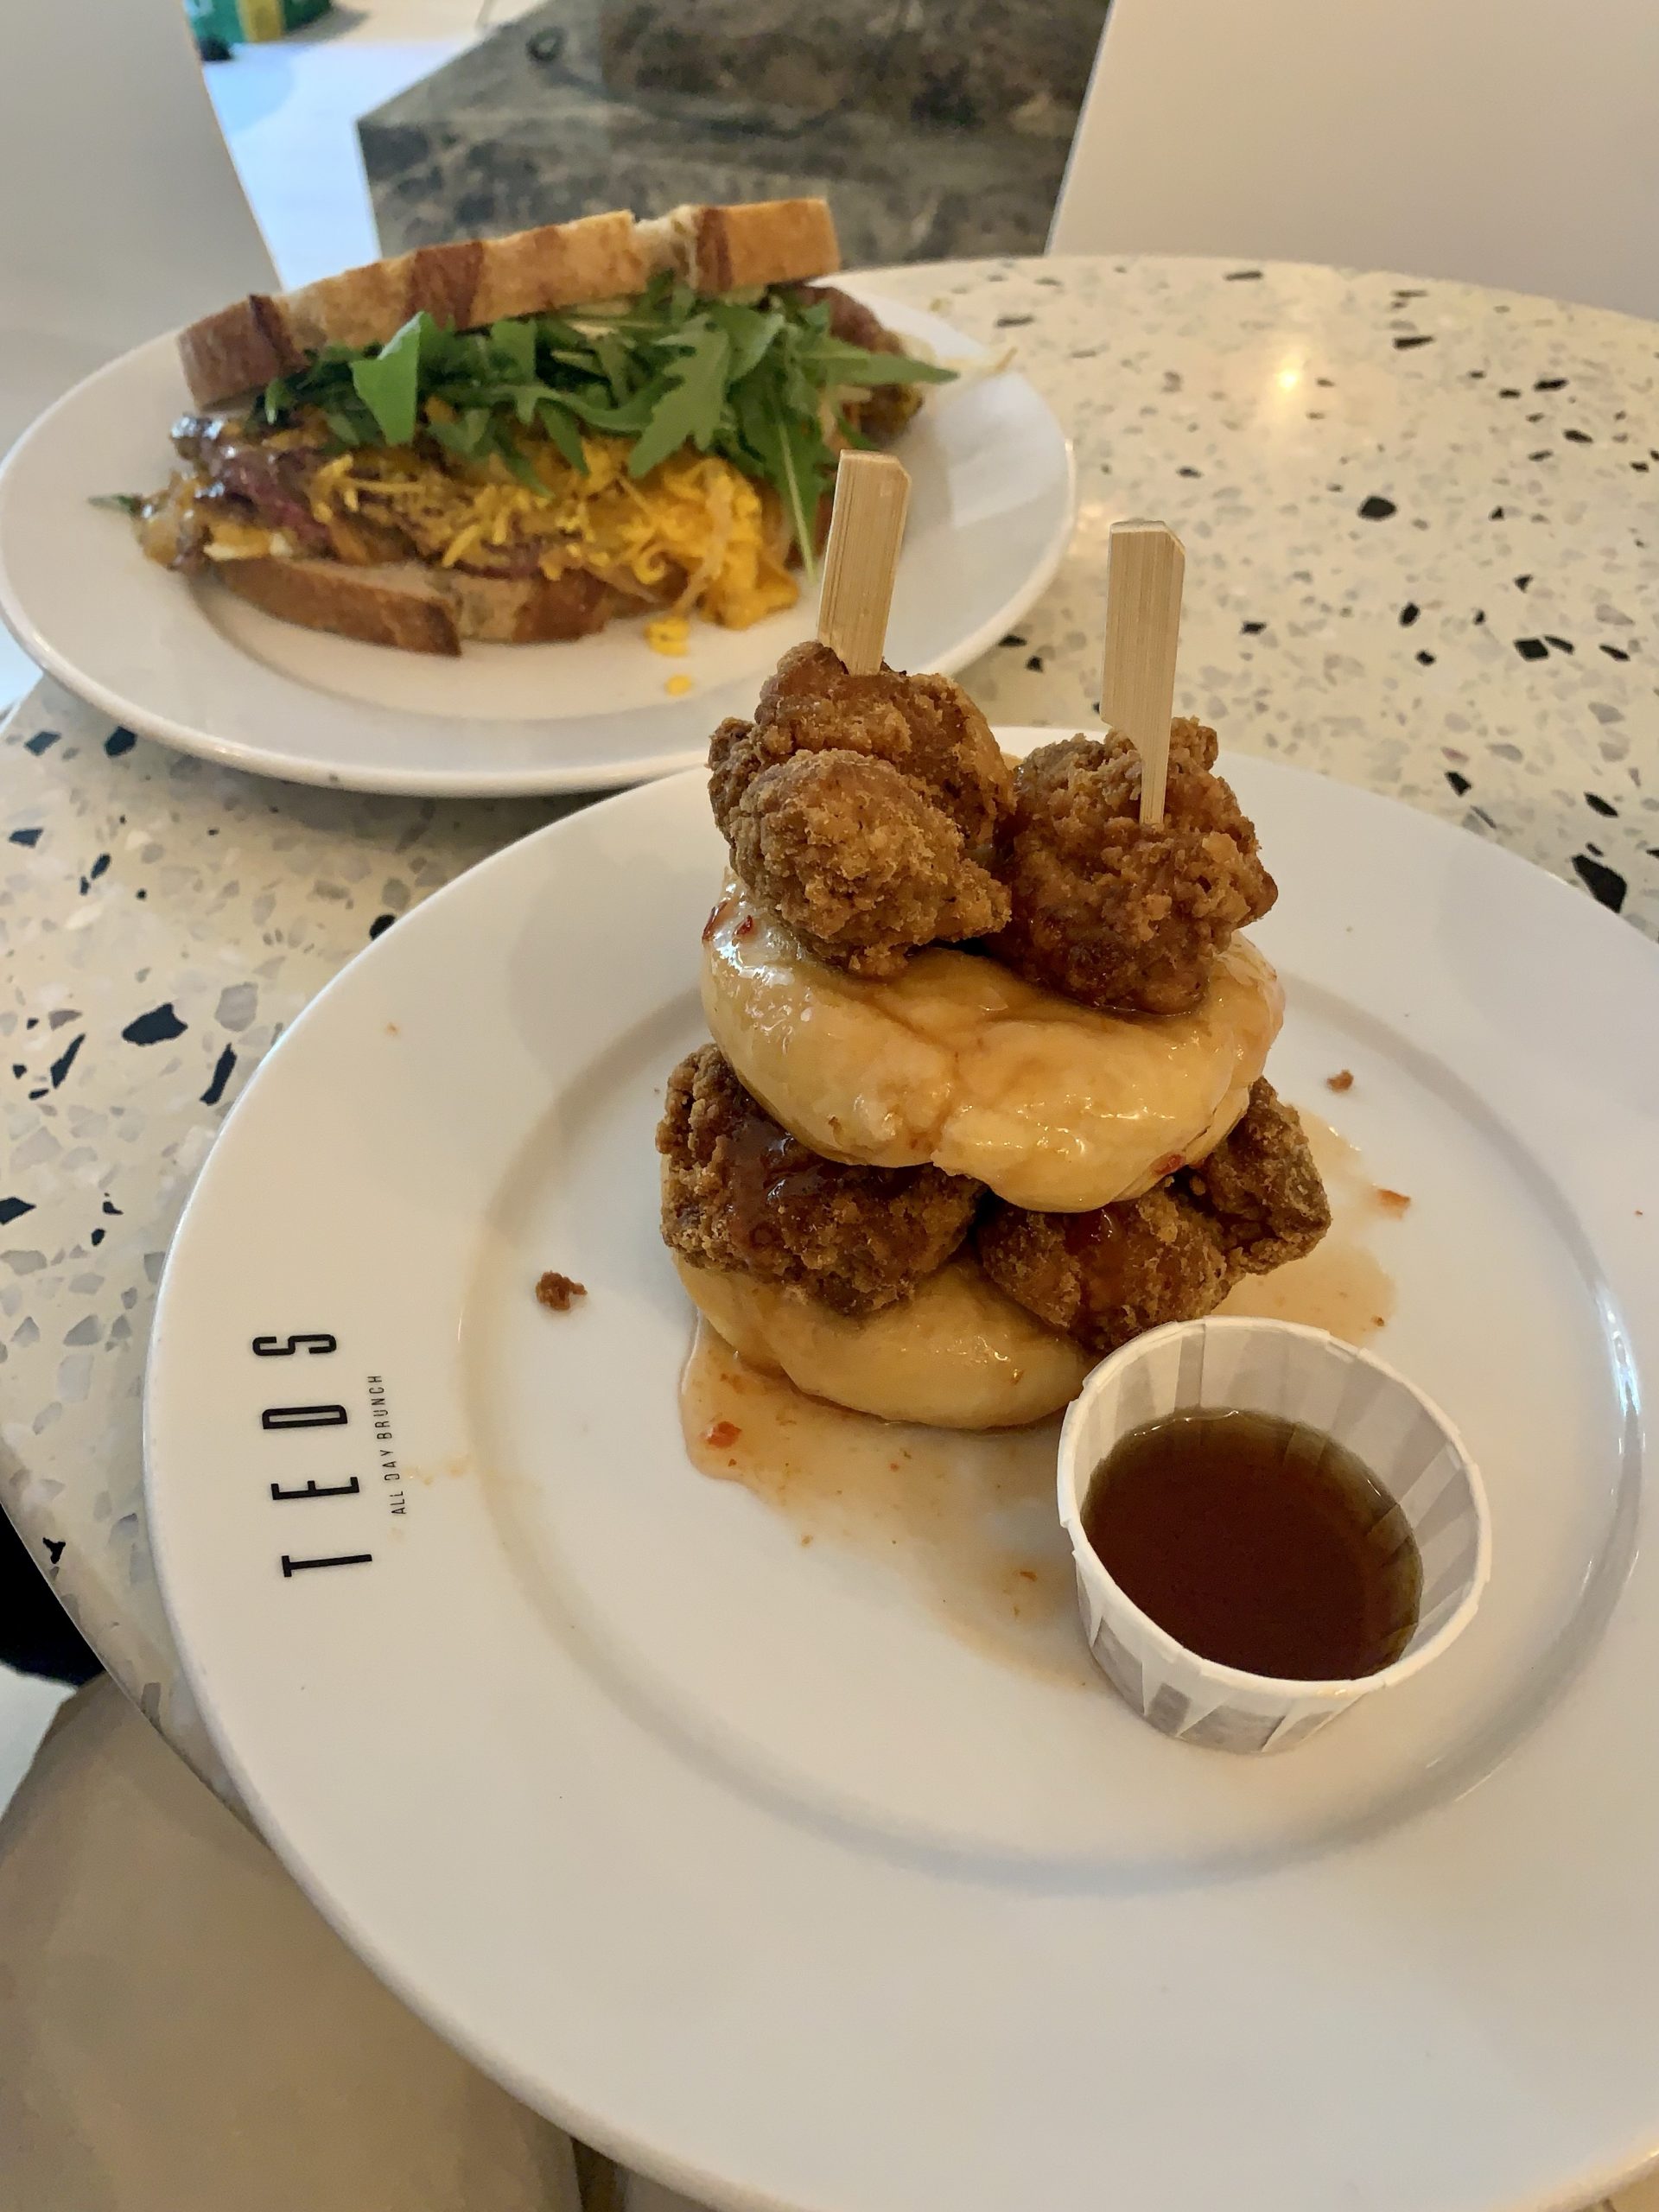 Fried chicken donut and steak and cheese sandiwch - Teds